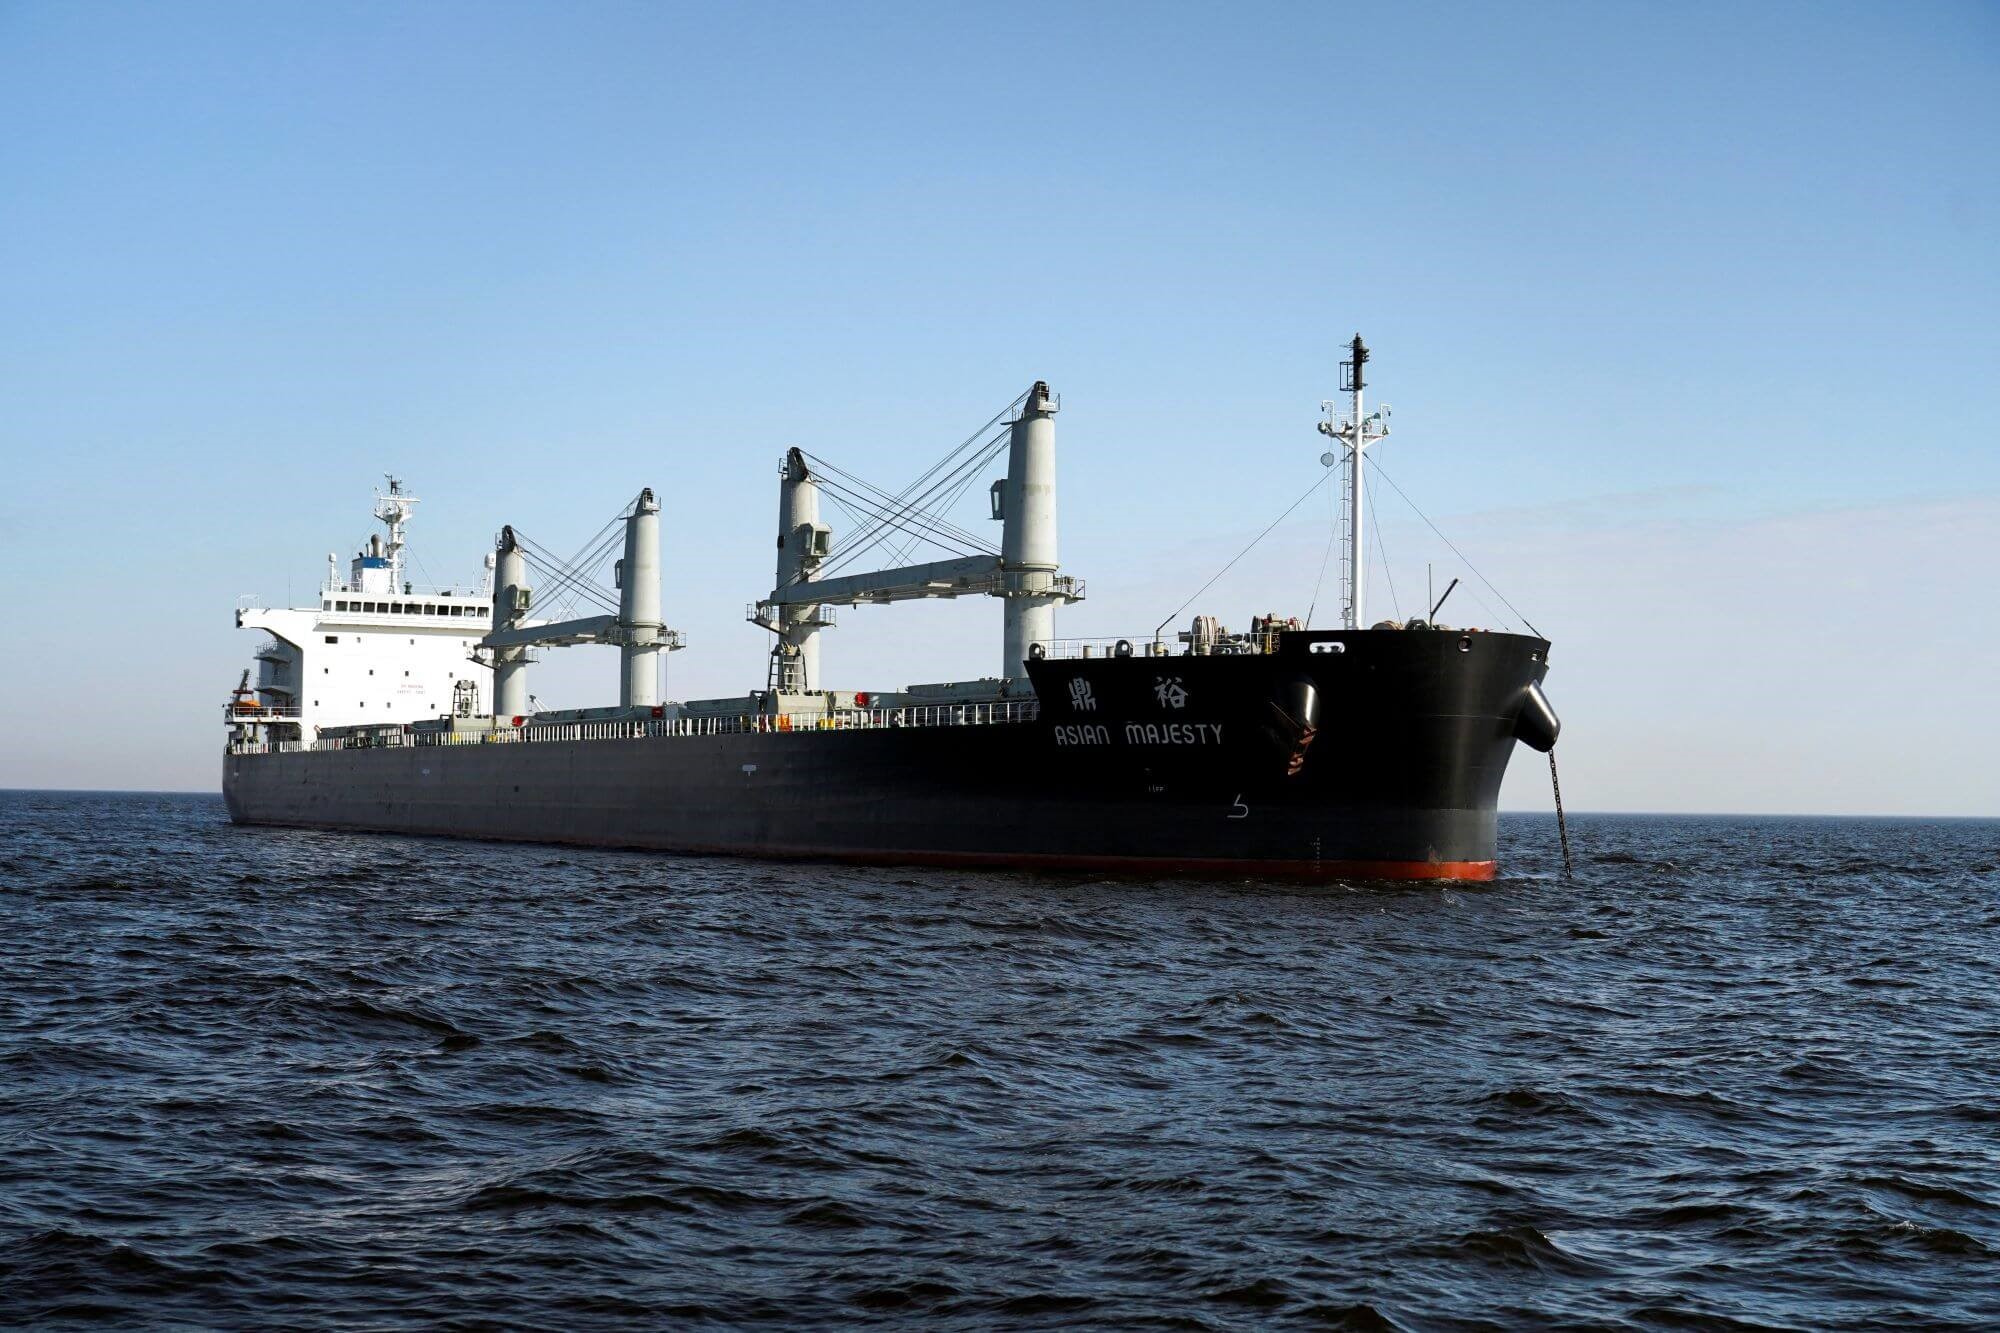  A ship carrying Russian fertiliser which Latvia seized last is seen floating in the Gulf of Riga, Latvia April 25, 2023. REUTERS